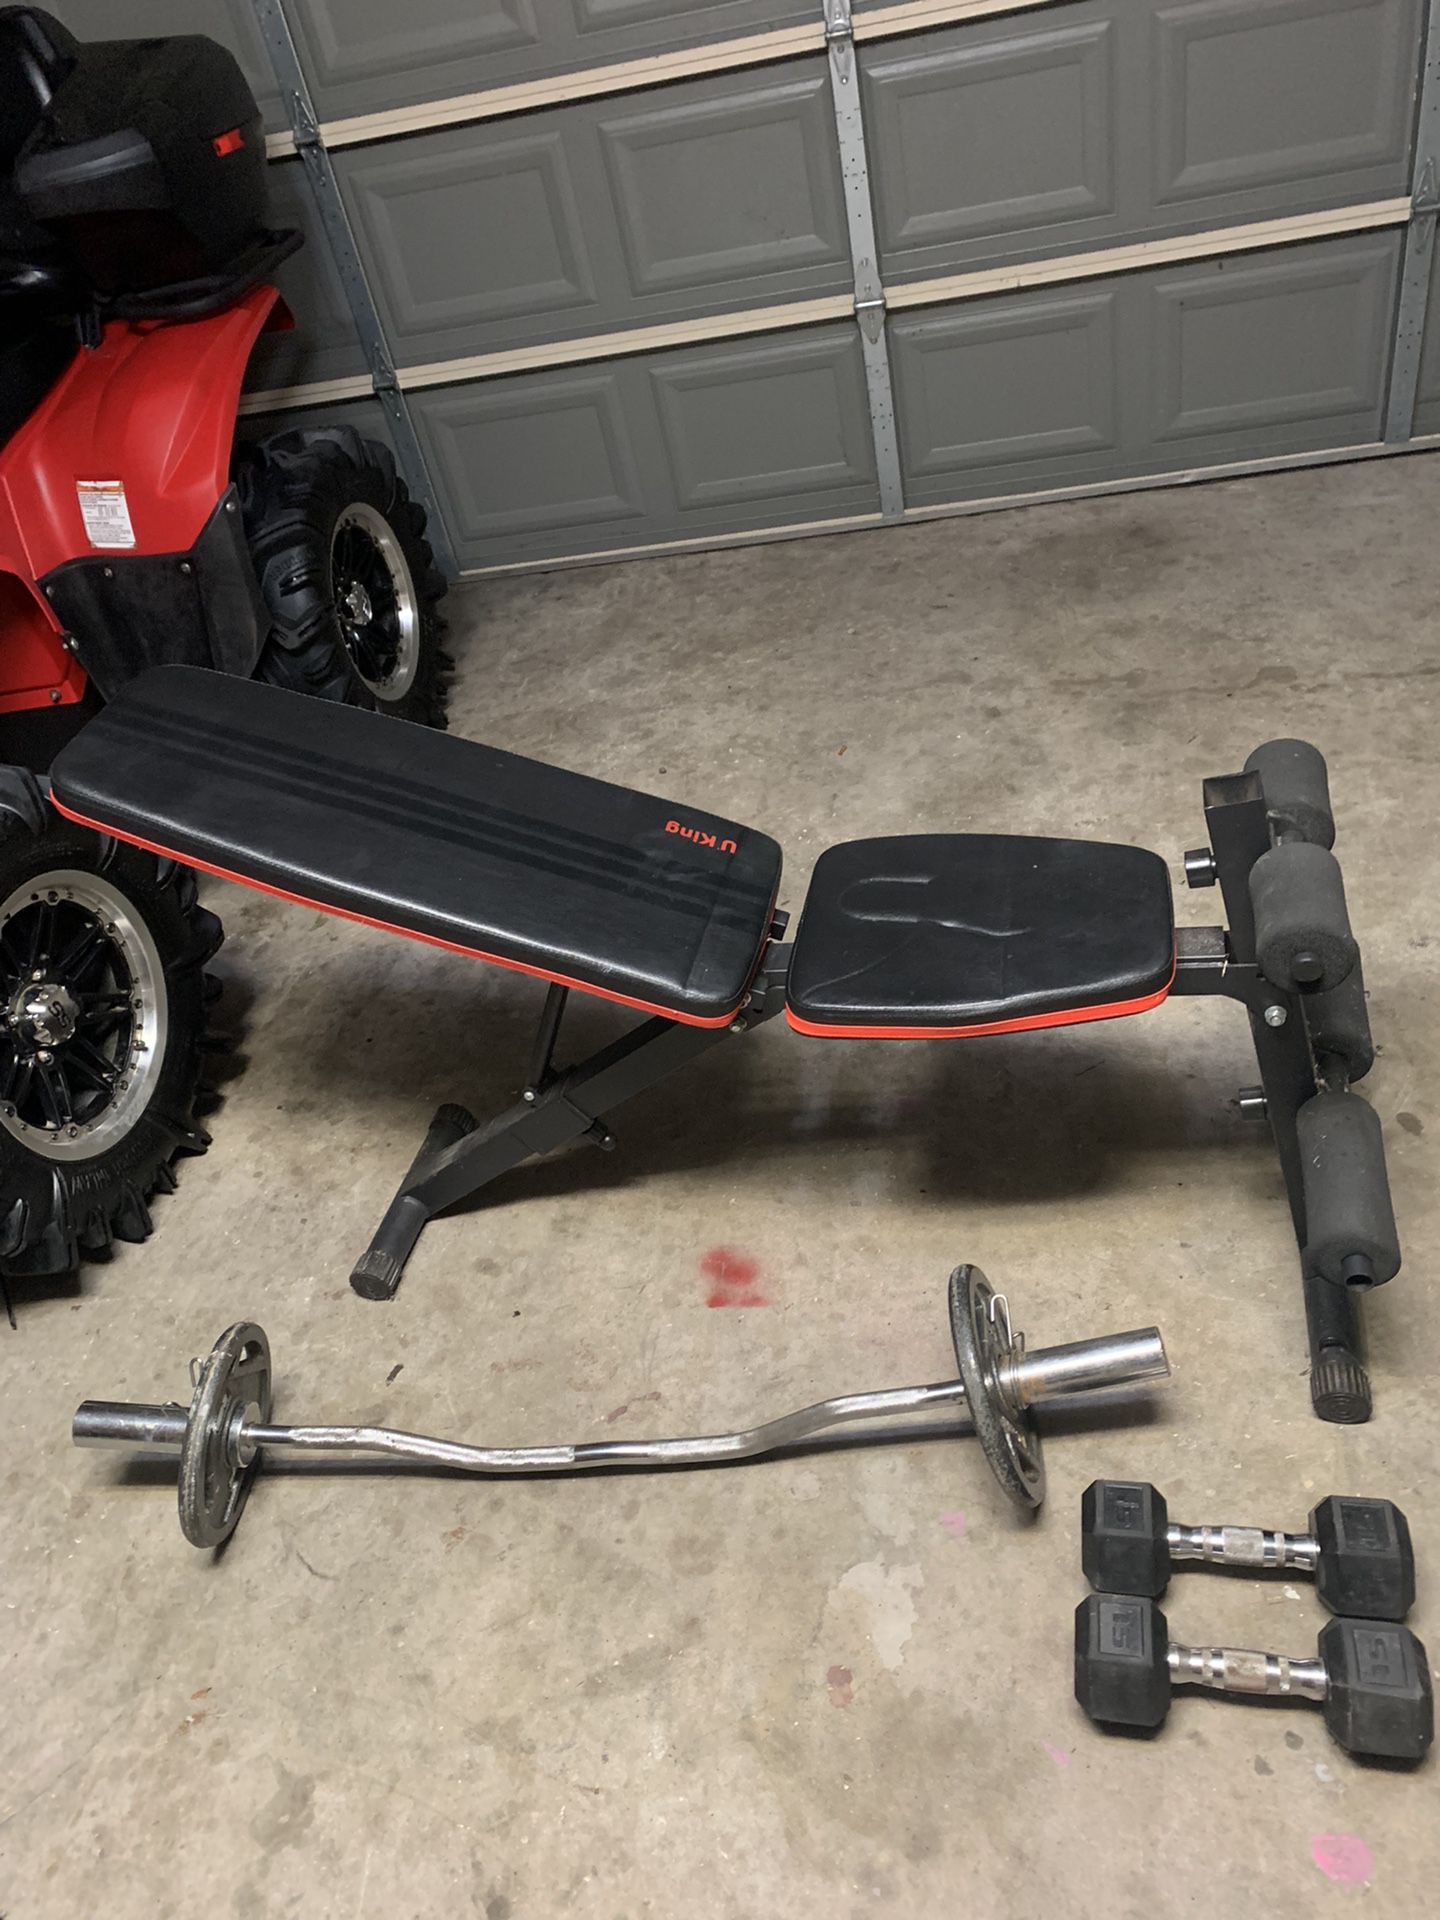 Foldable Weight Bench 